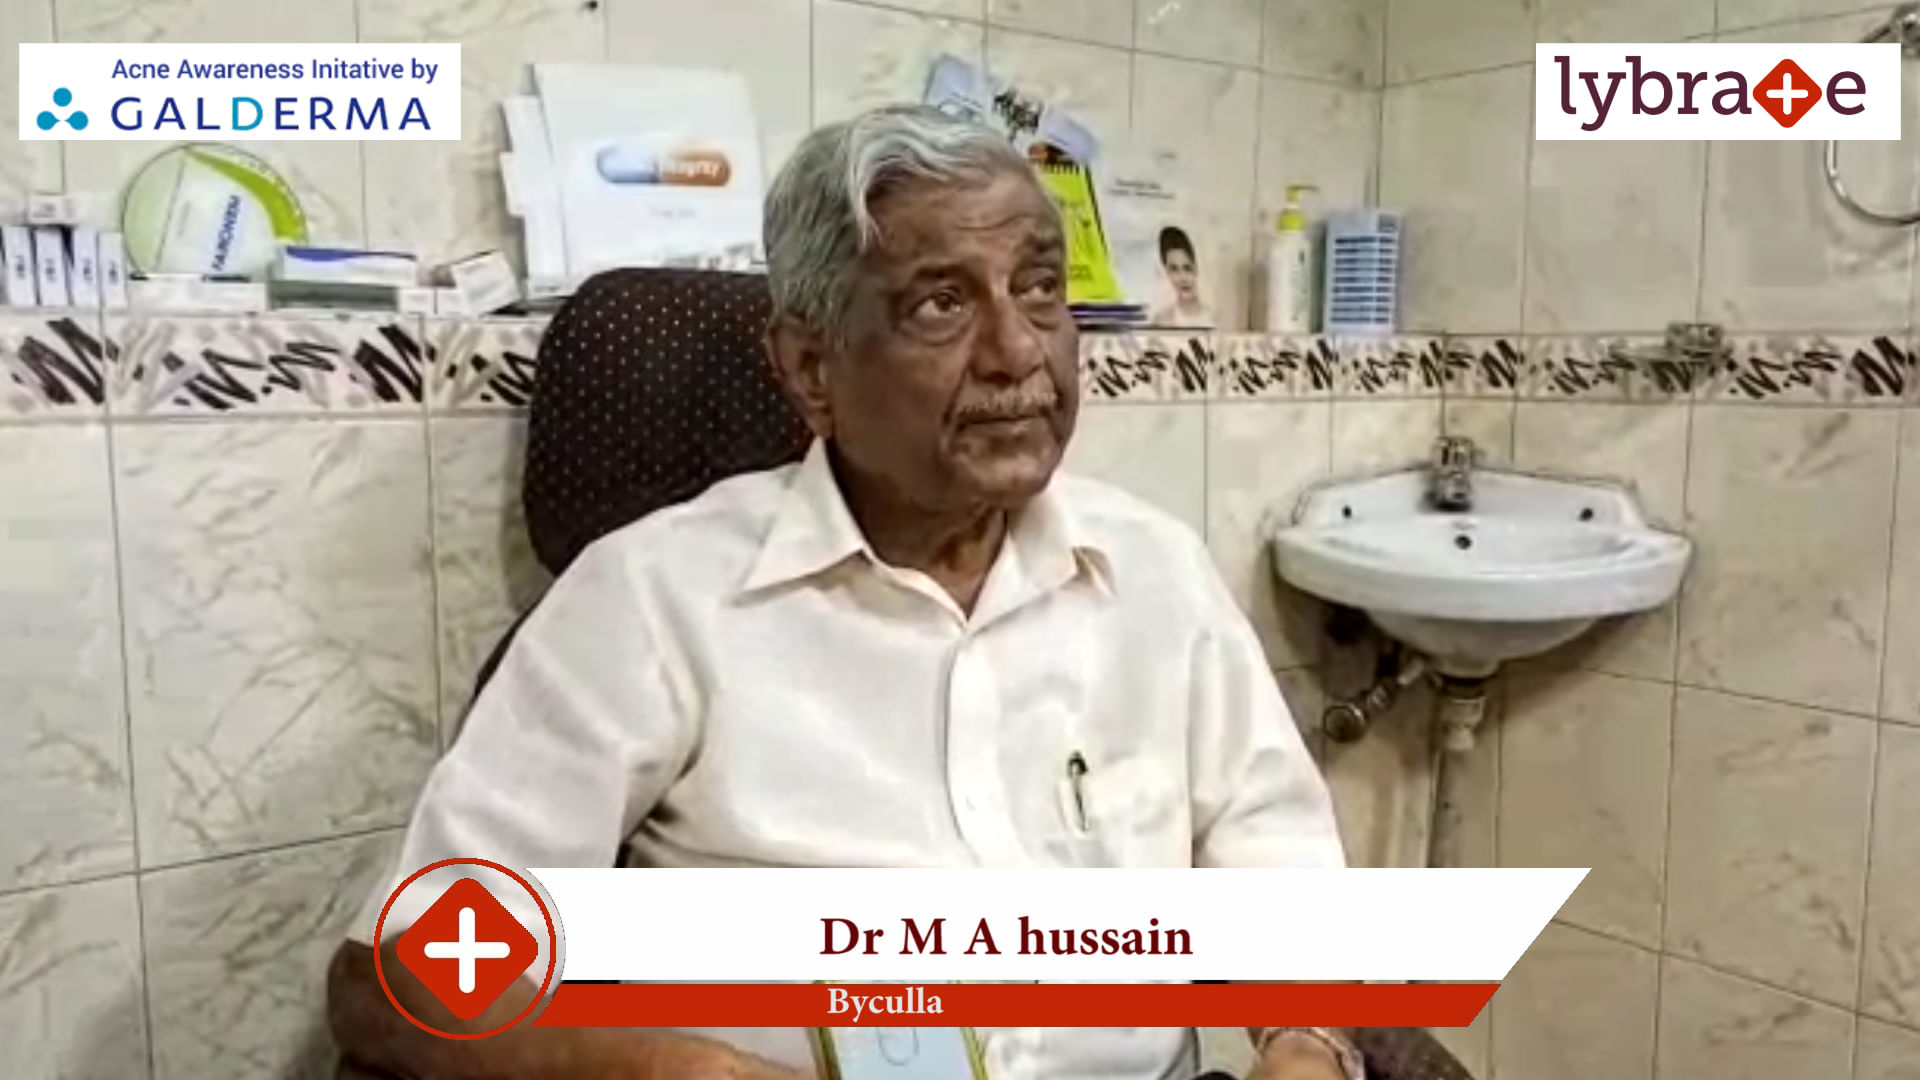 Lybrate |  Dr. M A hussain speaks on IMPORTANCE OF TREATING ACNE EARLY